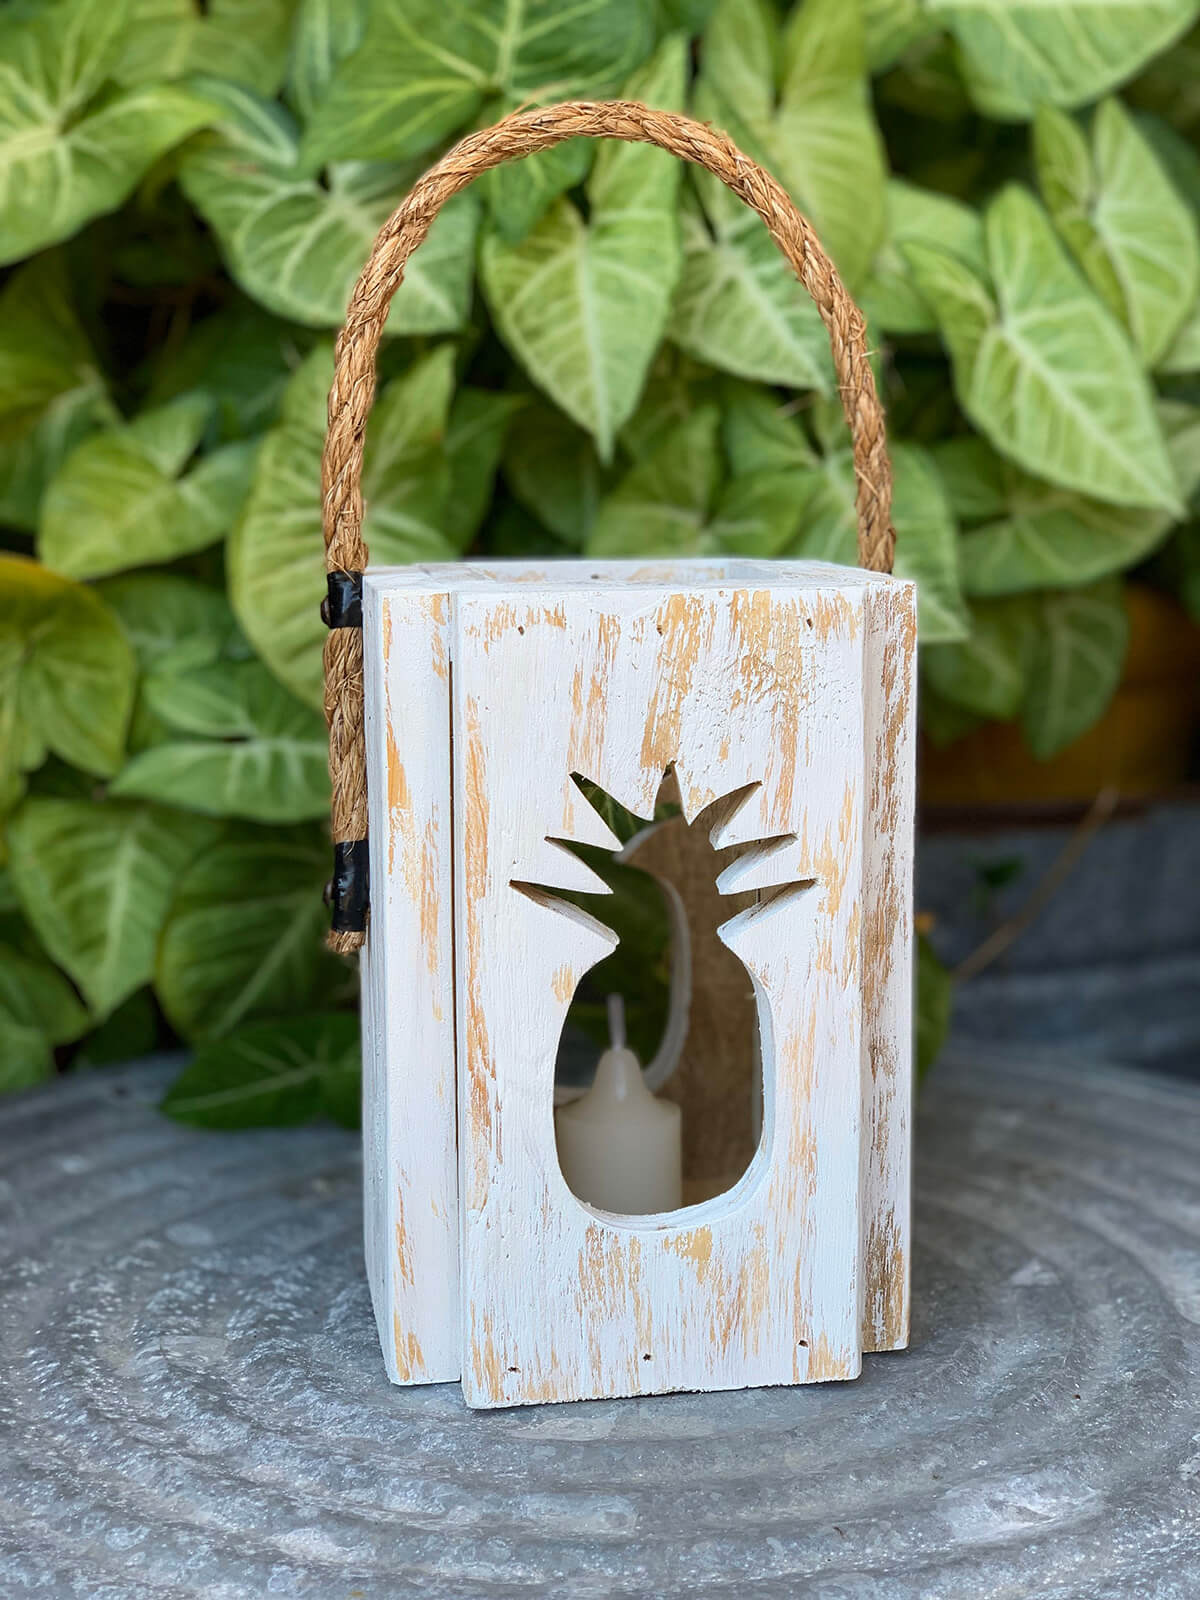 Rustic Wooden Lantern with Pineapple Cutout